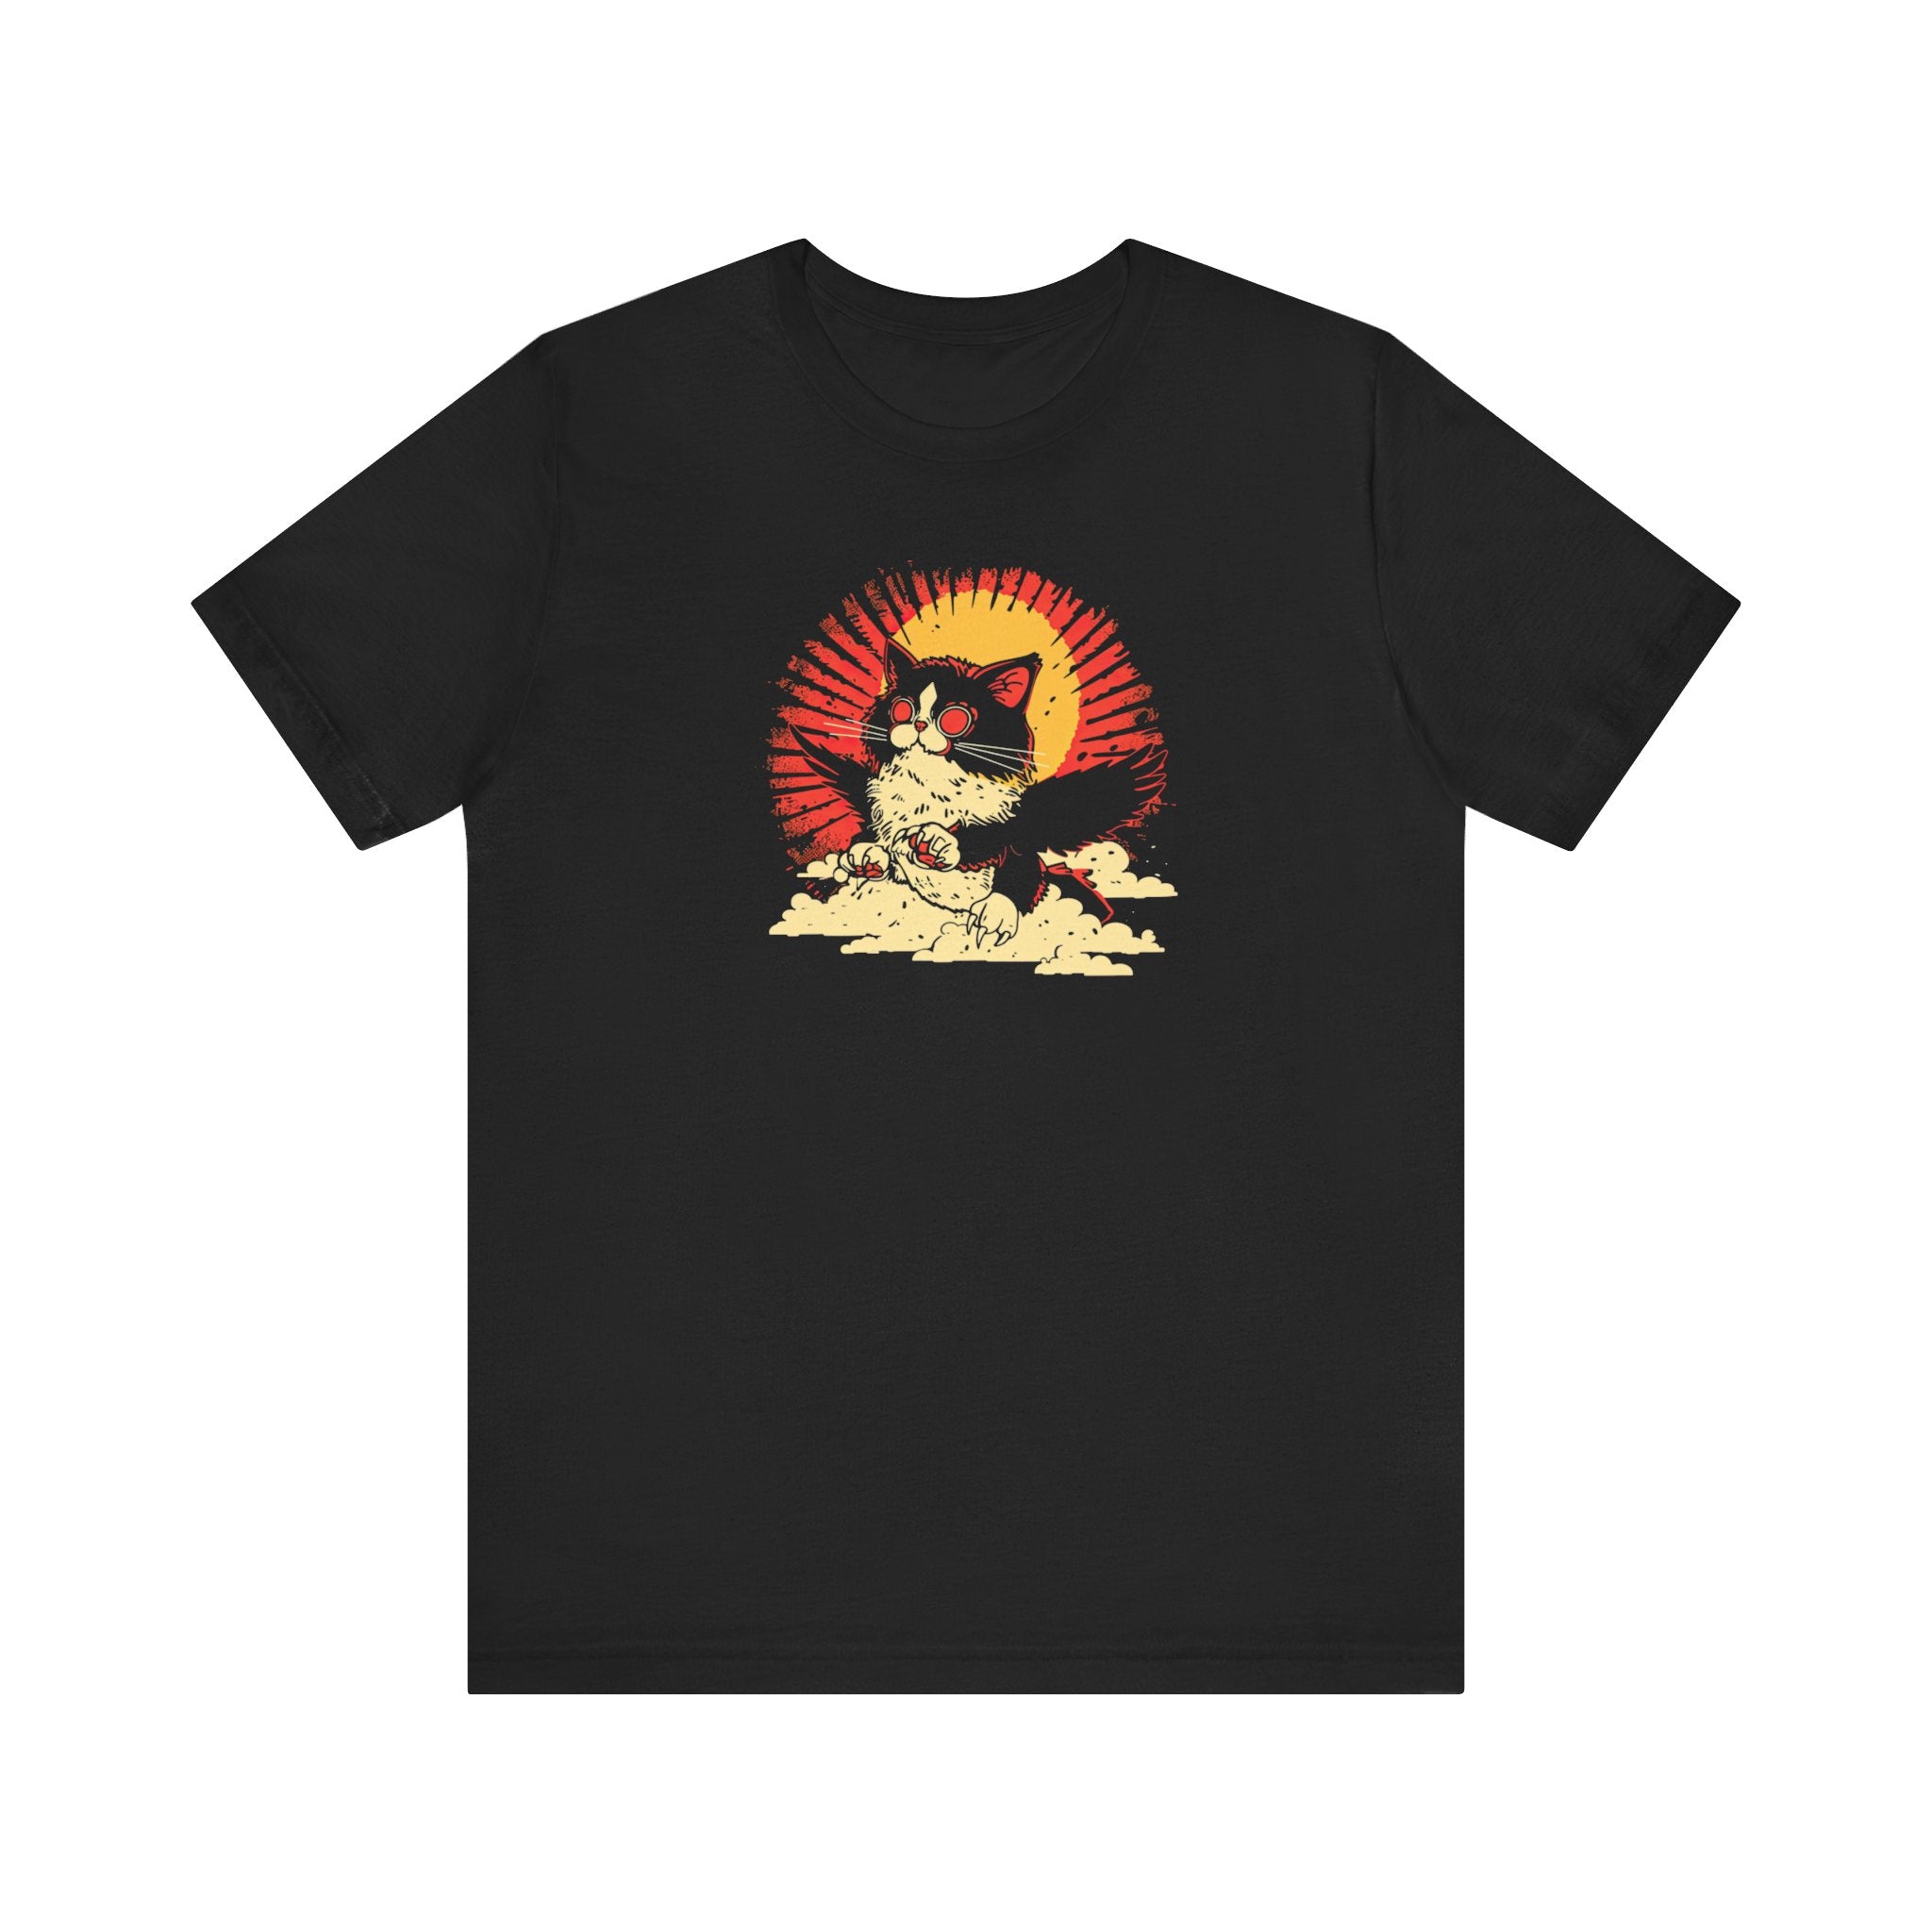 Retro Cat with Sunglasses and Eagle Wings T-Shirt